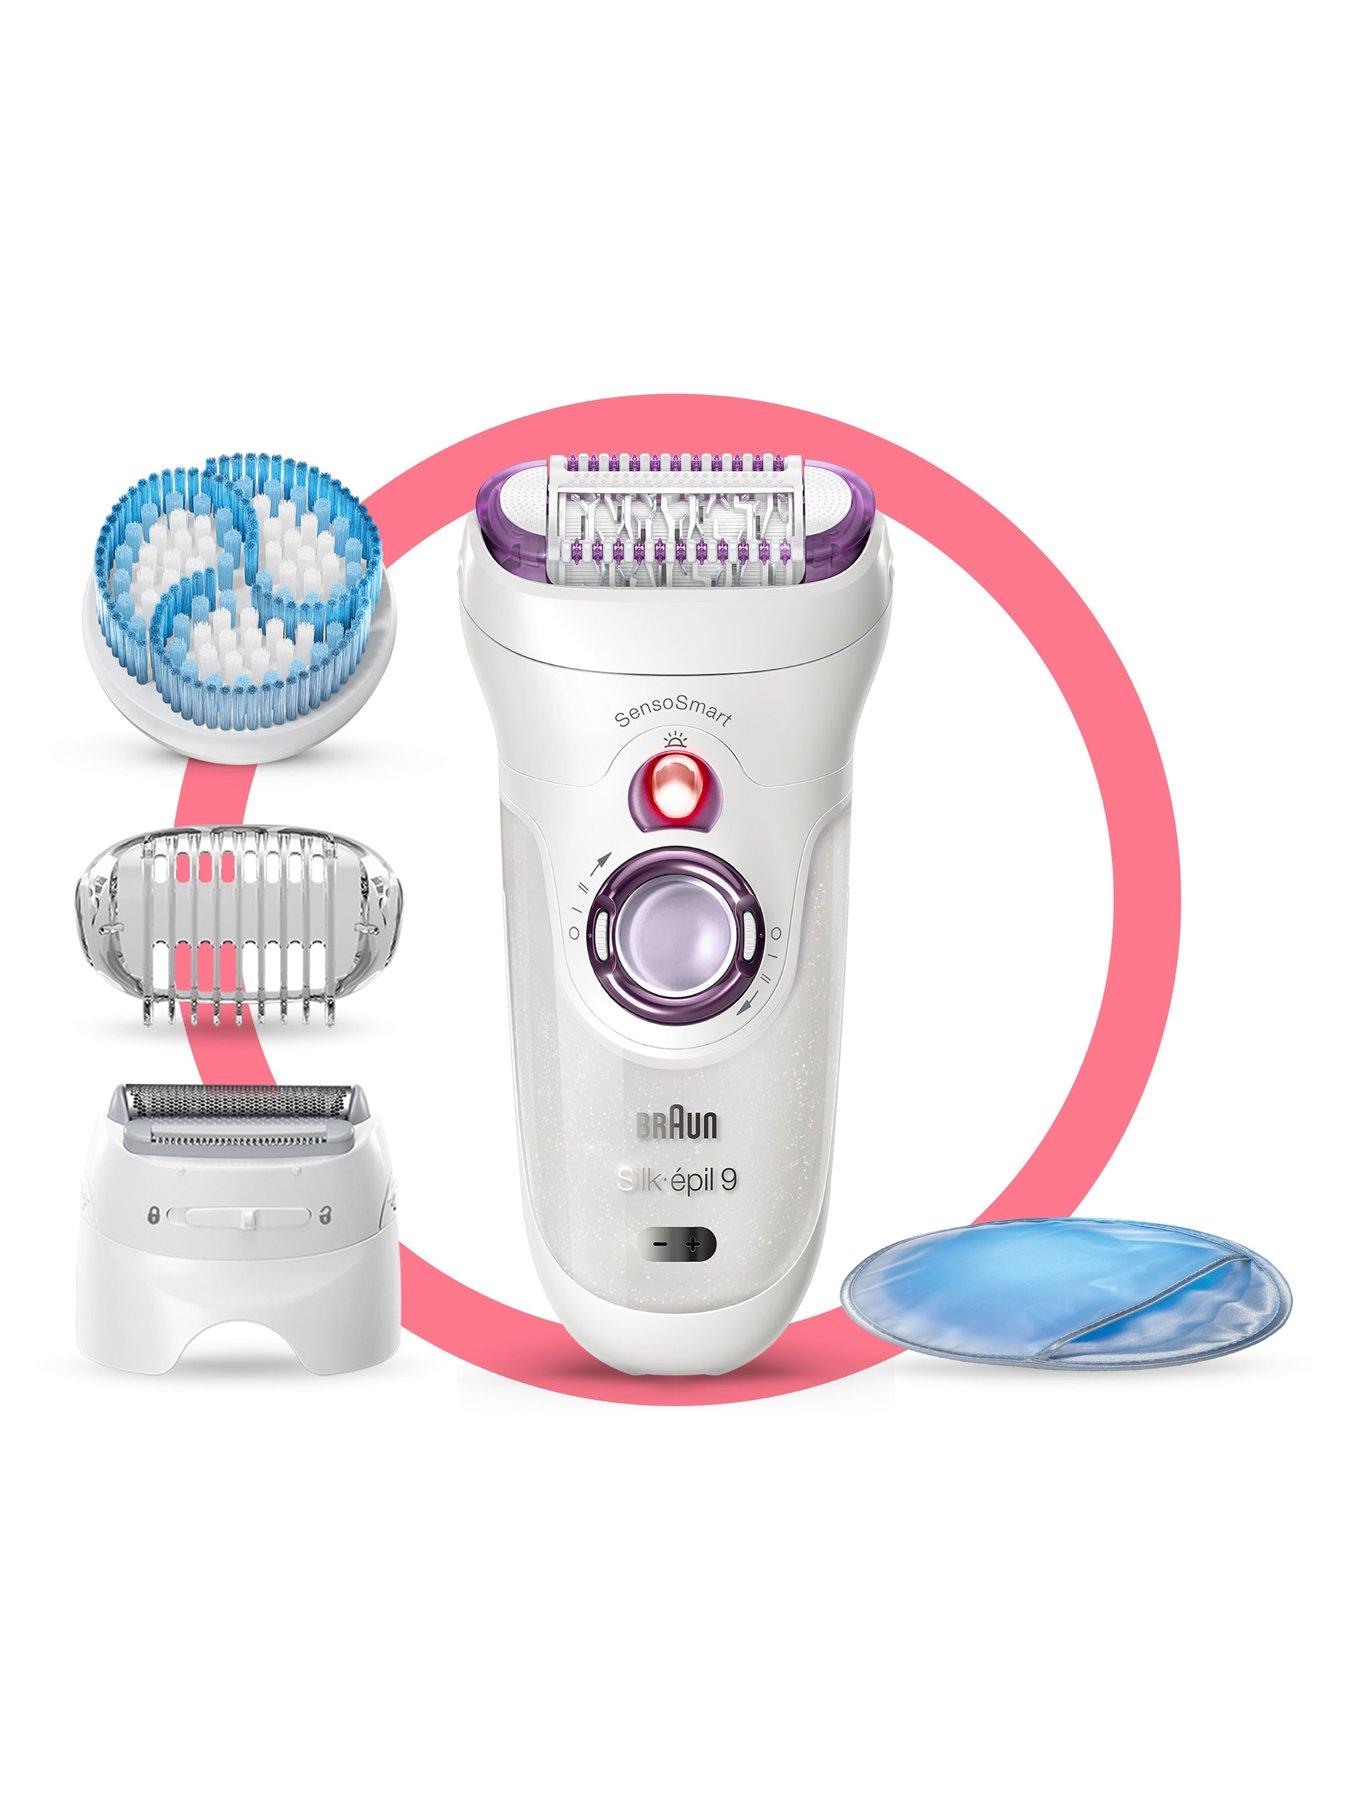 Braun Silk-épil 9, Epilator For Long Lasting Hair Removal, 4 Extras, Pouch,  Cooling Glove, 9-735